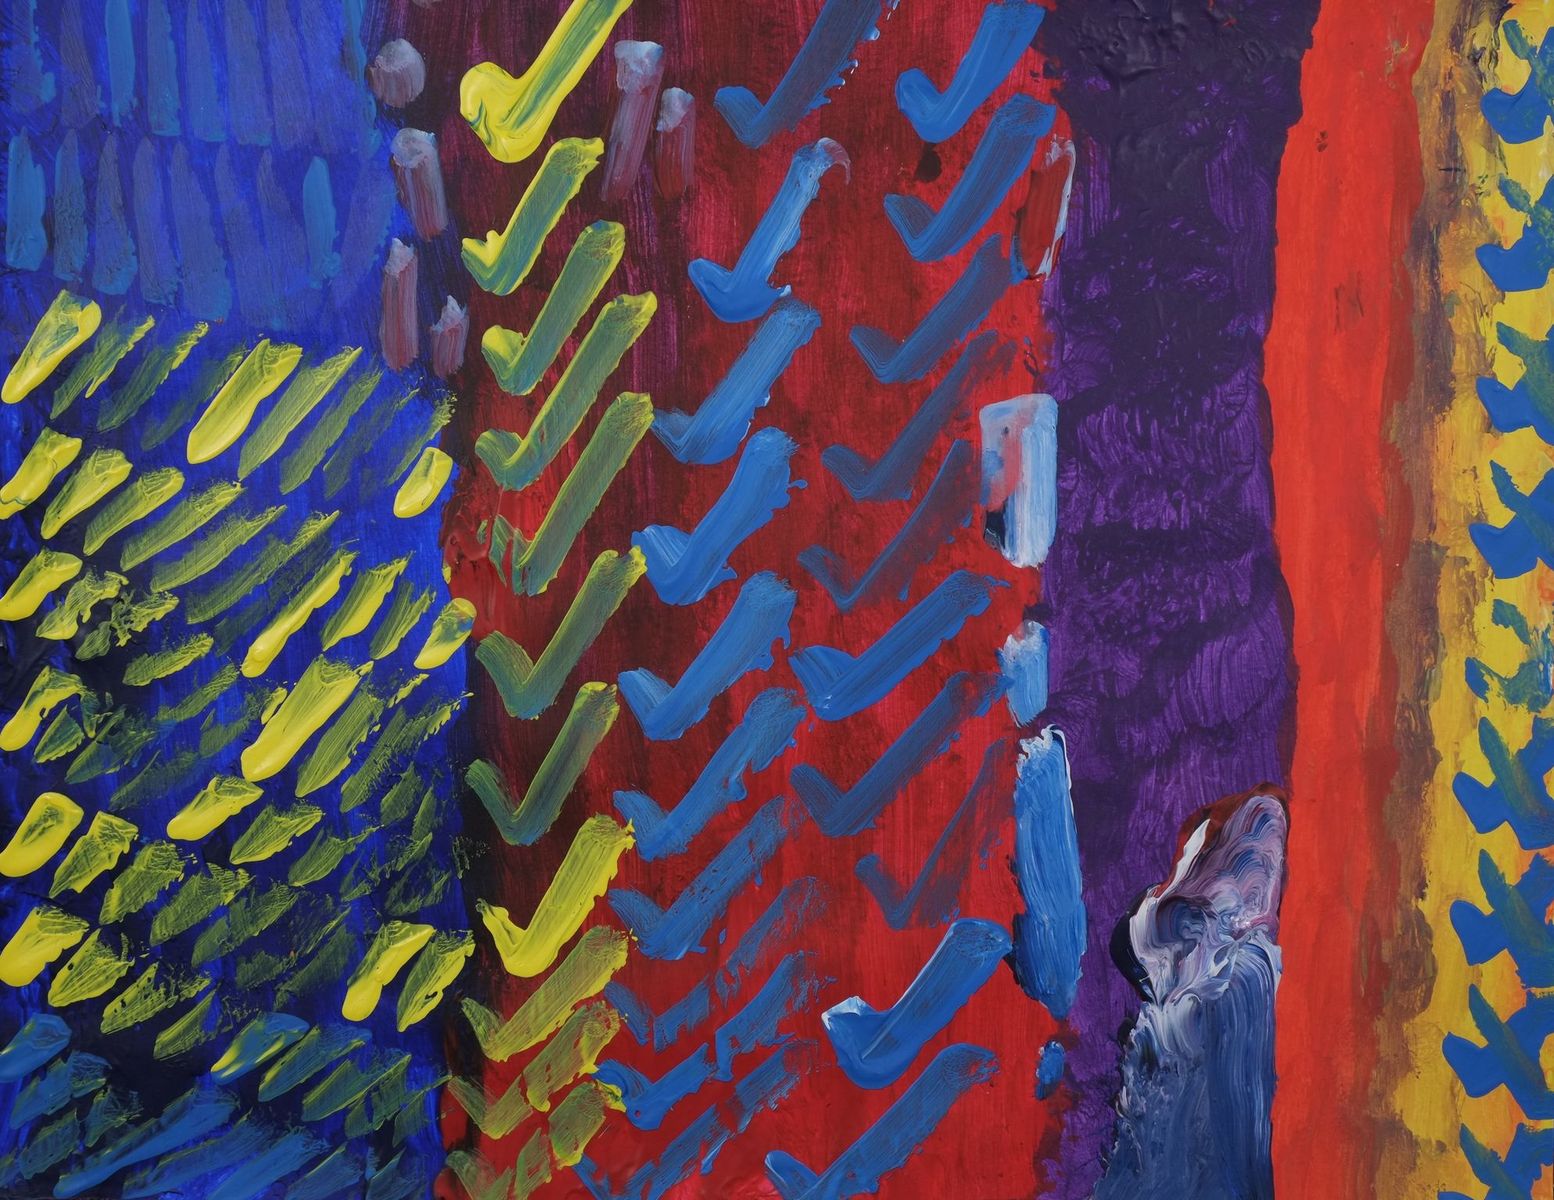 Acrylic on paper artwork with blue, maroon, red, purple and orange vertical lines with blue and yellow check marks